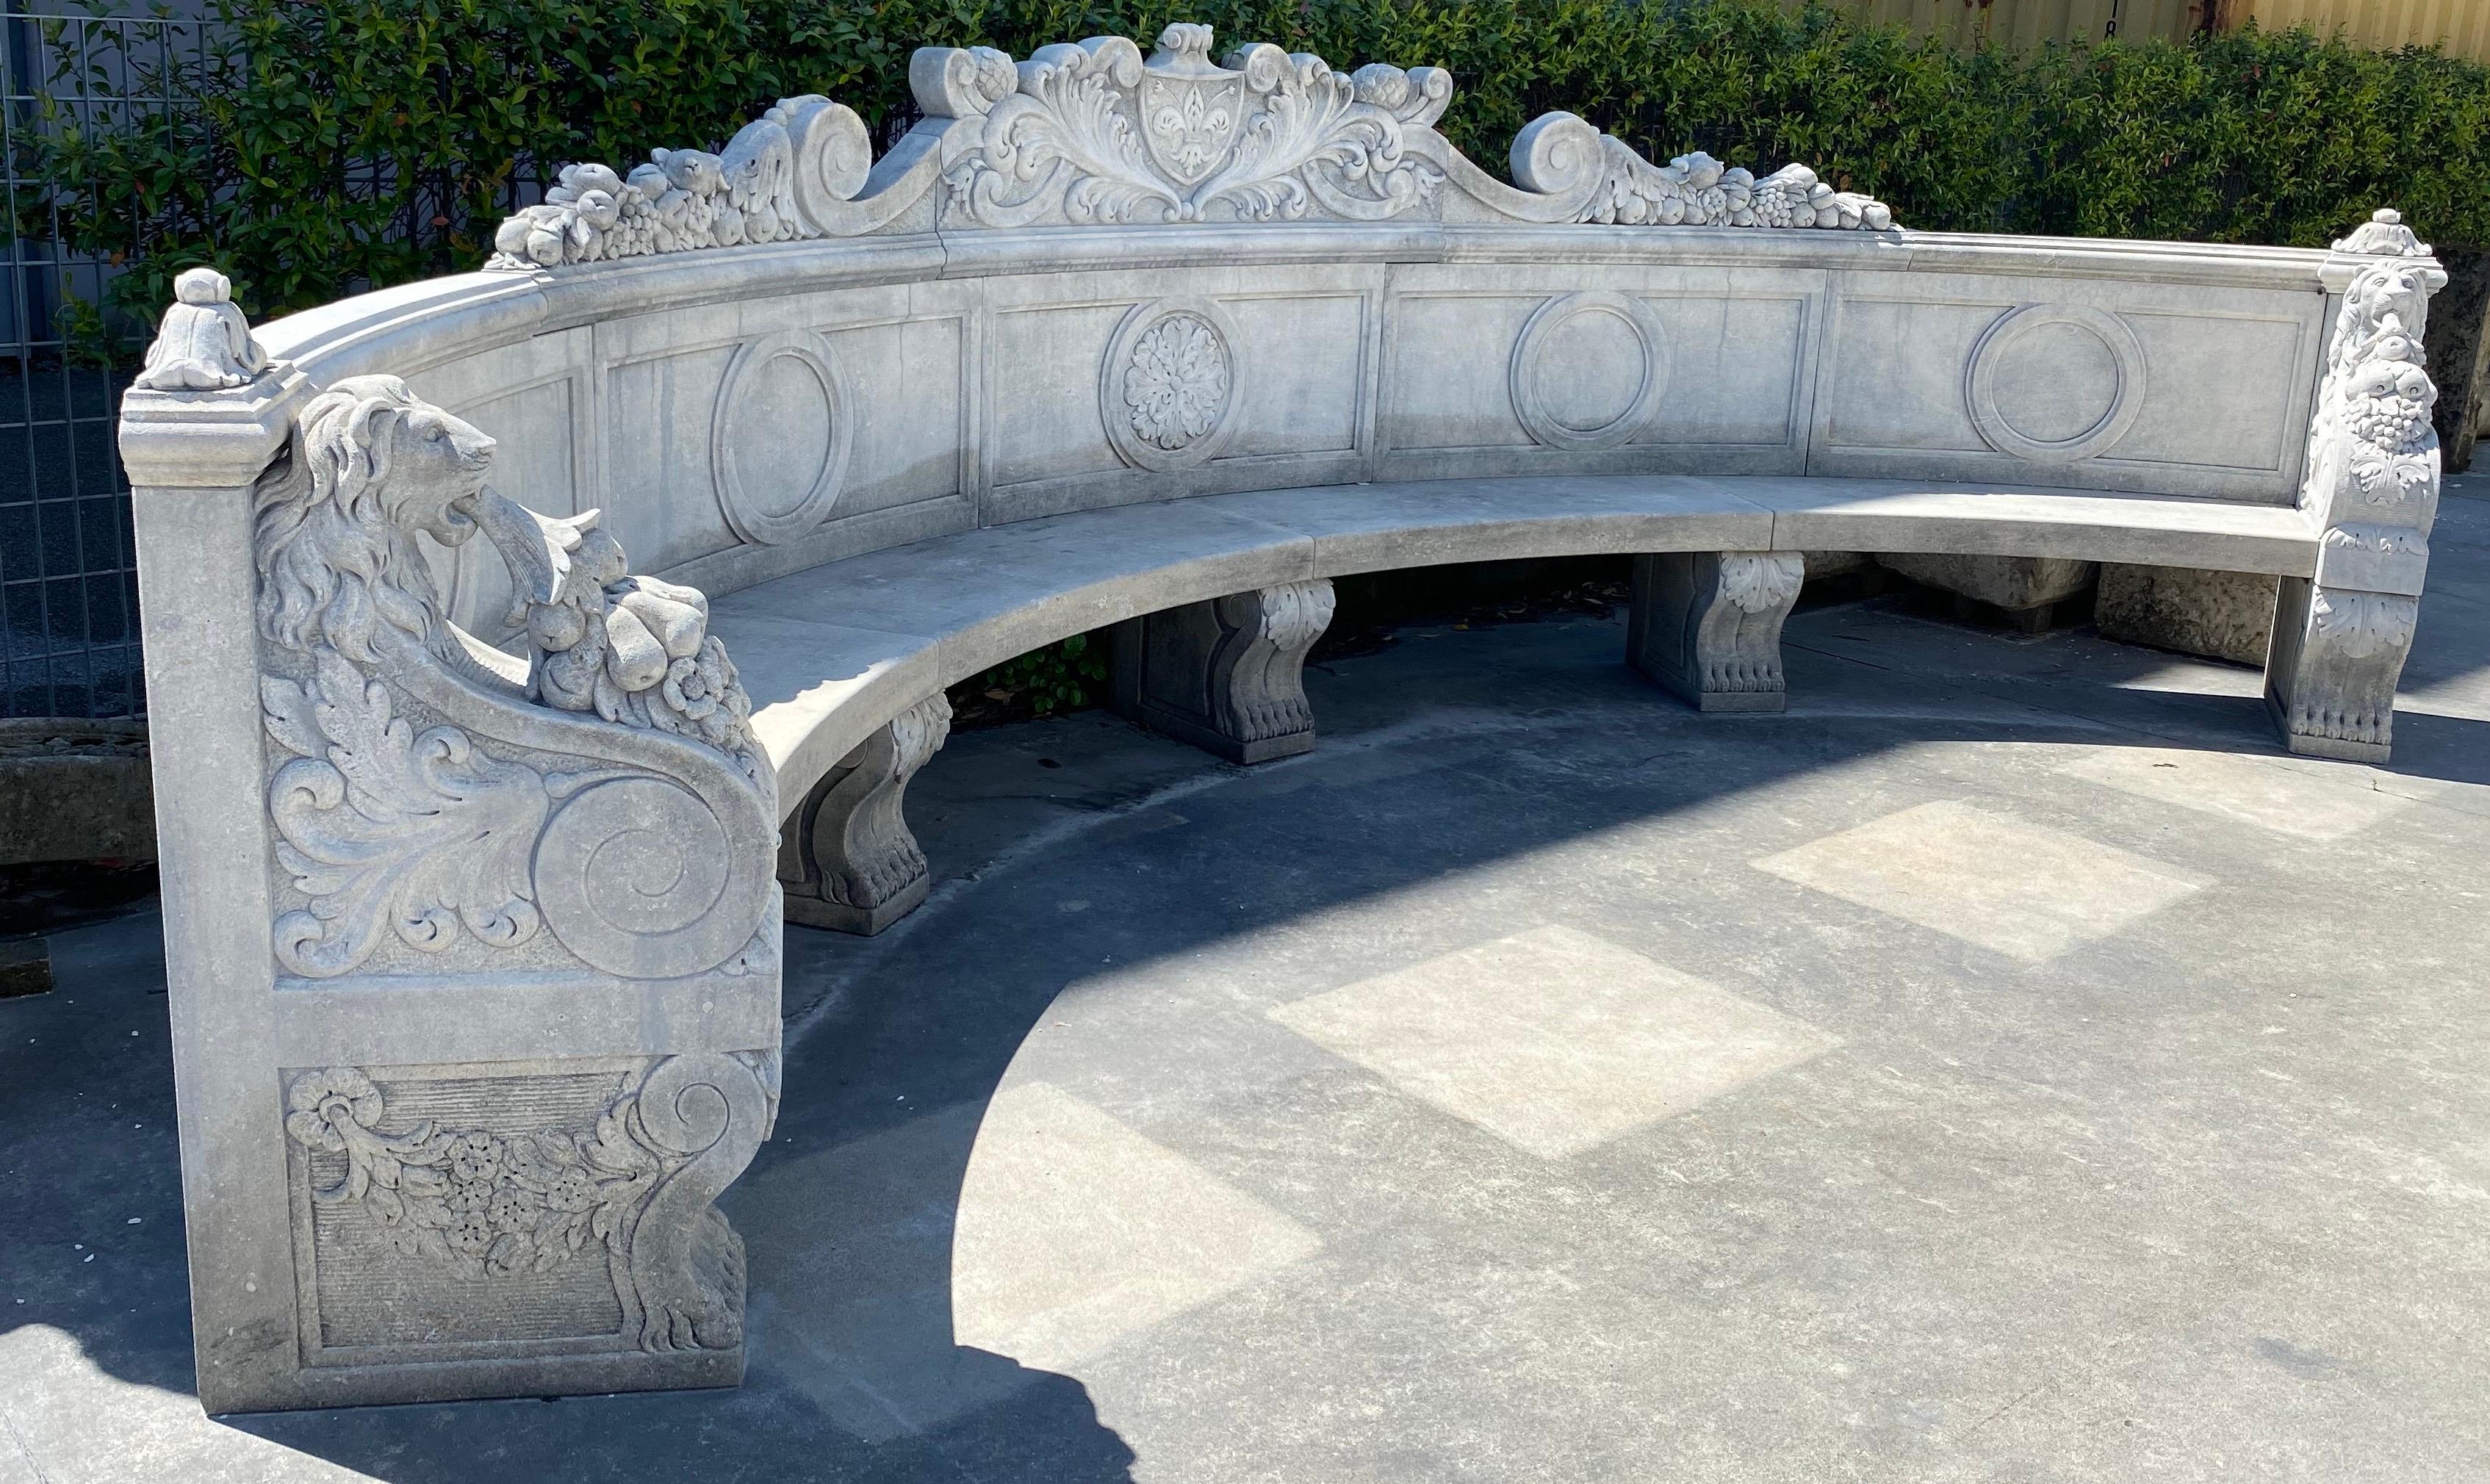 Exceptional craftsmanship with stunning motifs in relief in ' Pietra di Vicenza'. Rich decoration of the armrest with Griffins and garland -
Great decoration for Garden and Patio furniture.
This item can be disassembled and the elements individually